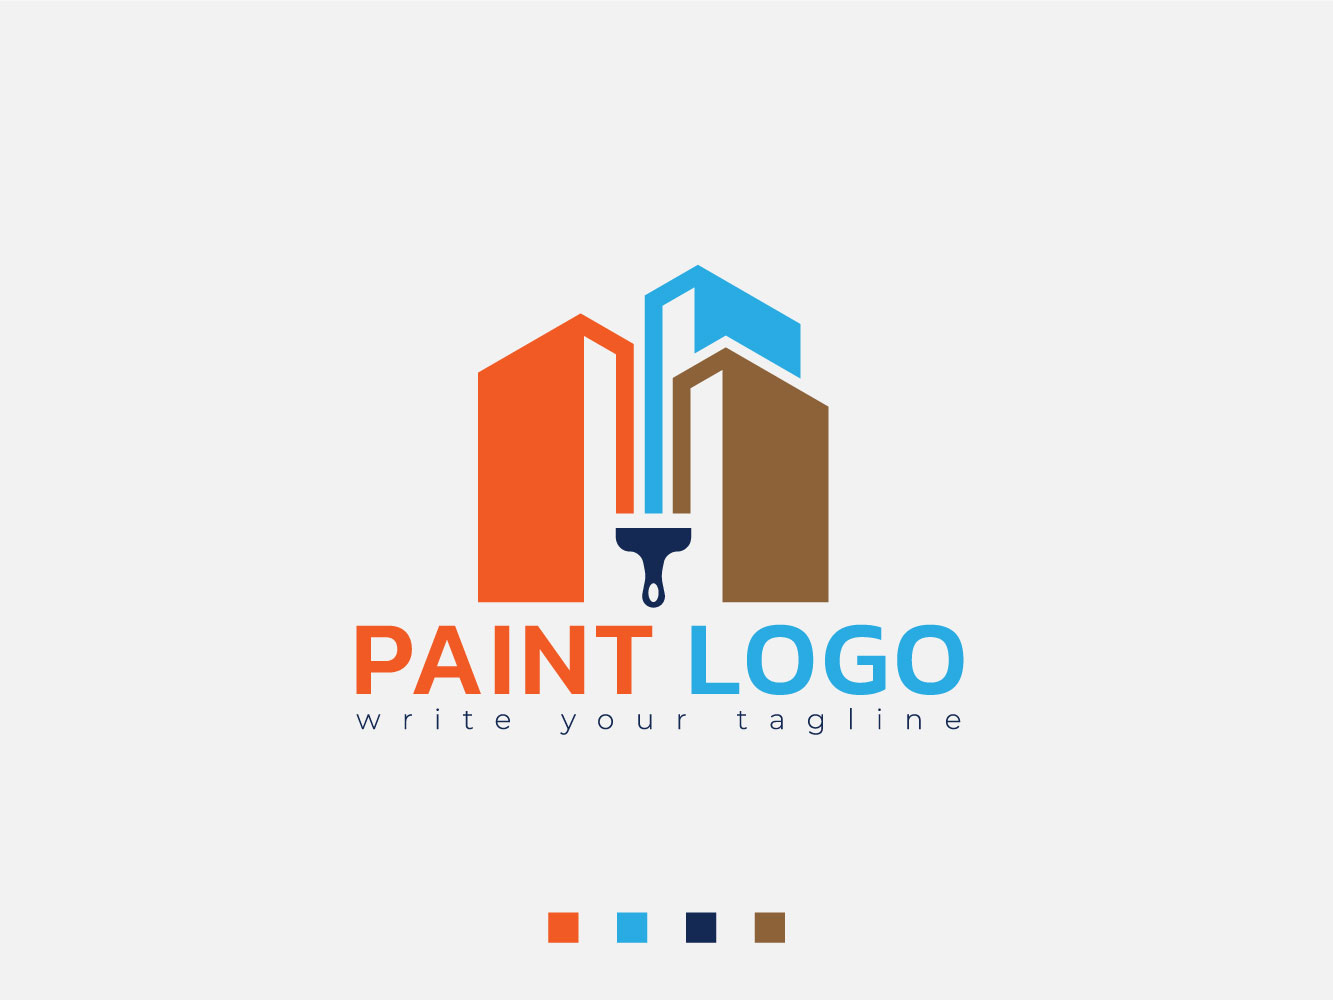 Logo Design, Concept For House Painting, Home Decoration, Painting Service